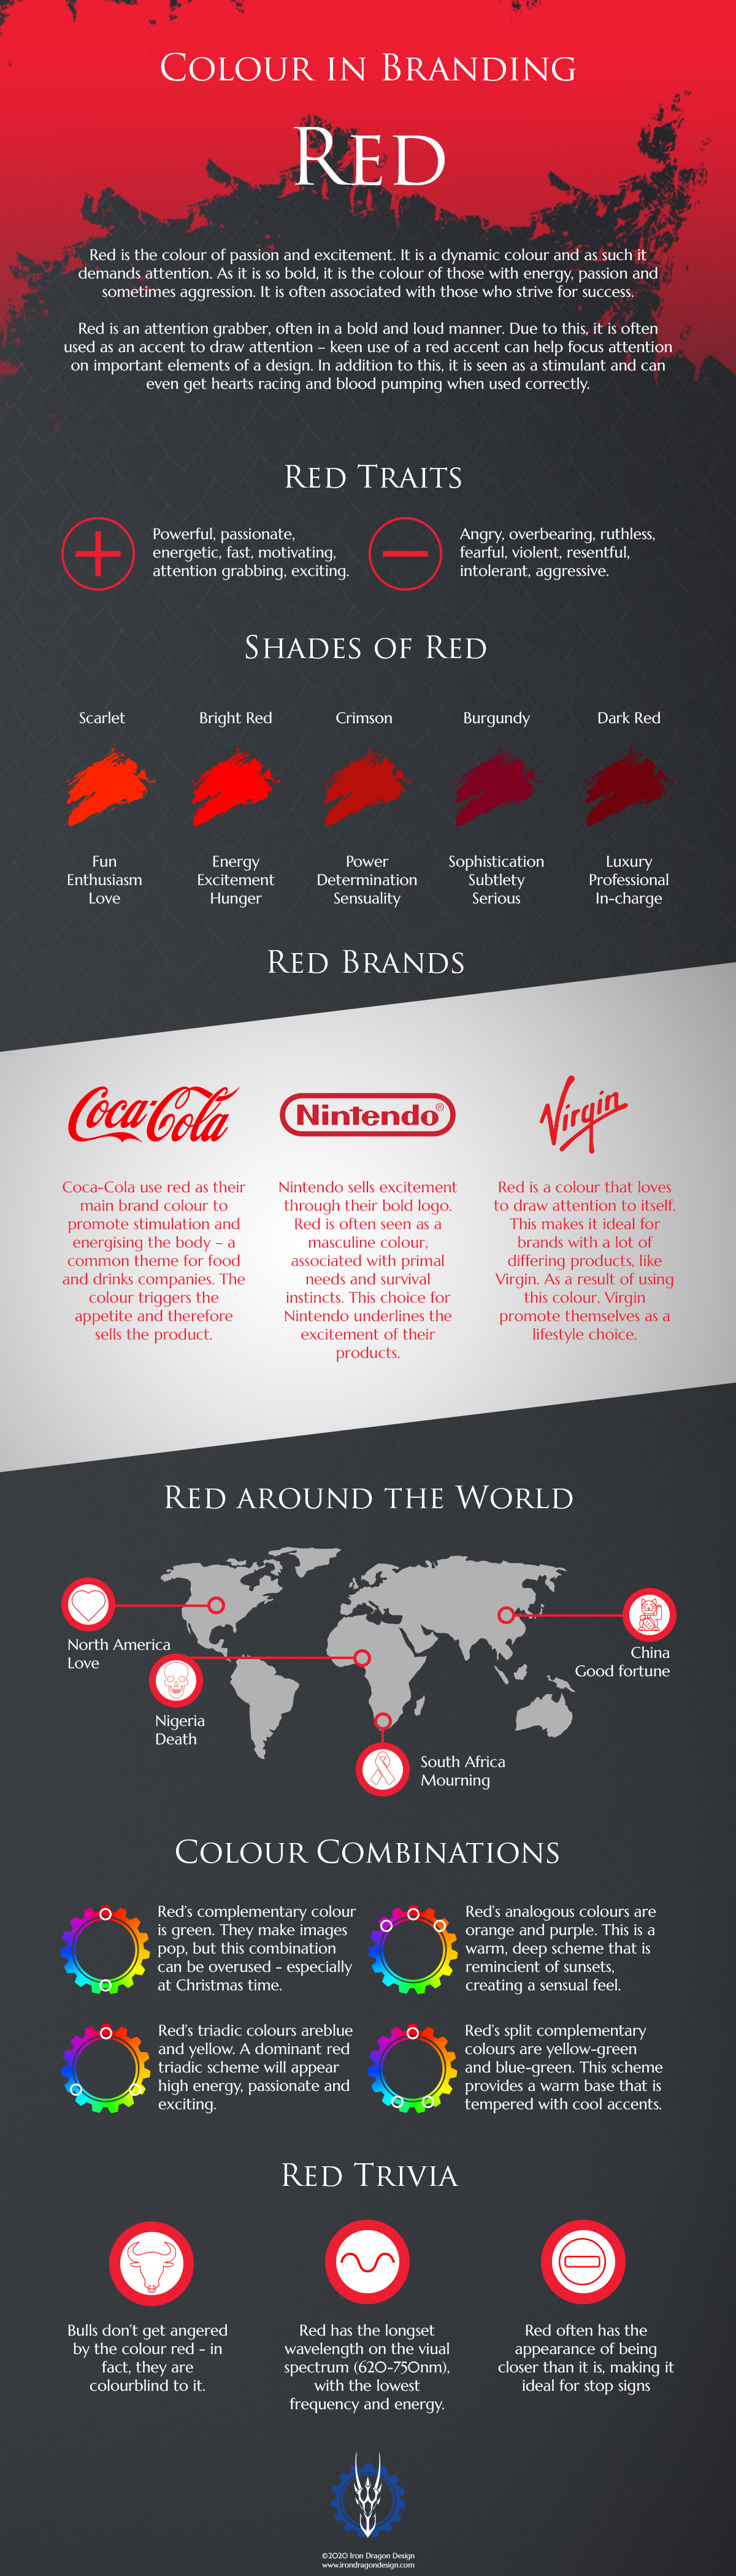 Colour in Branding Red Psychology Infographic